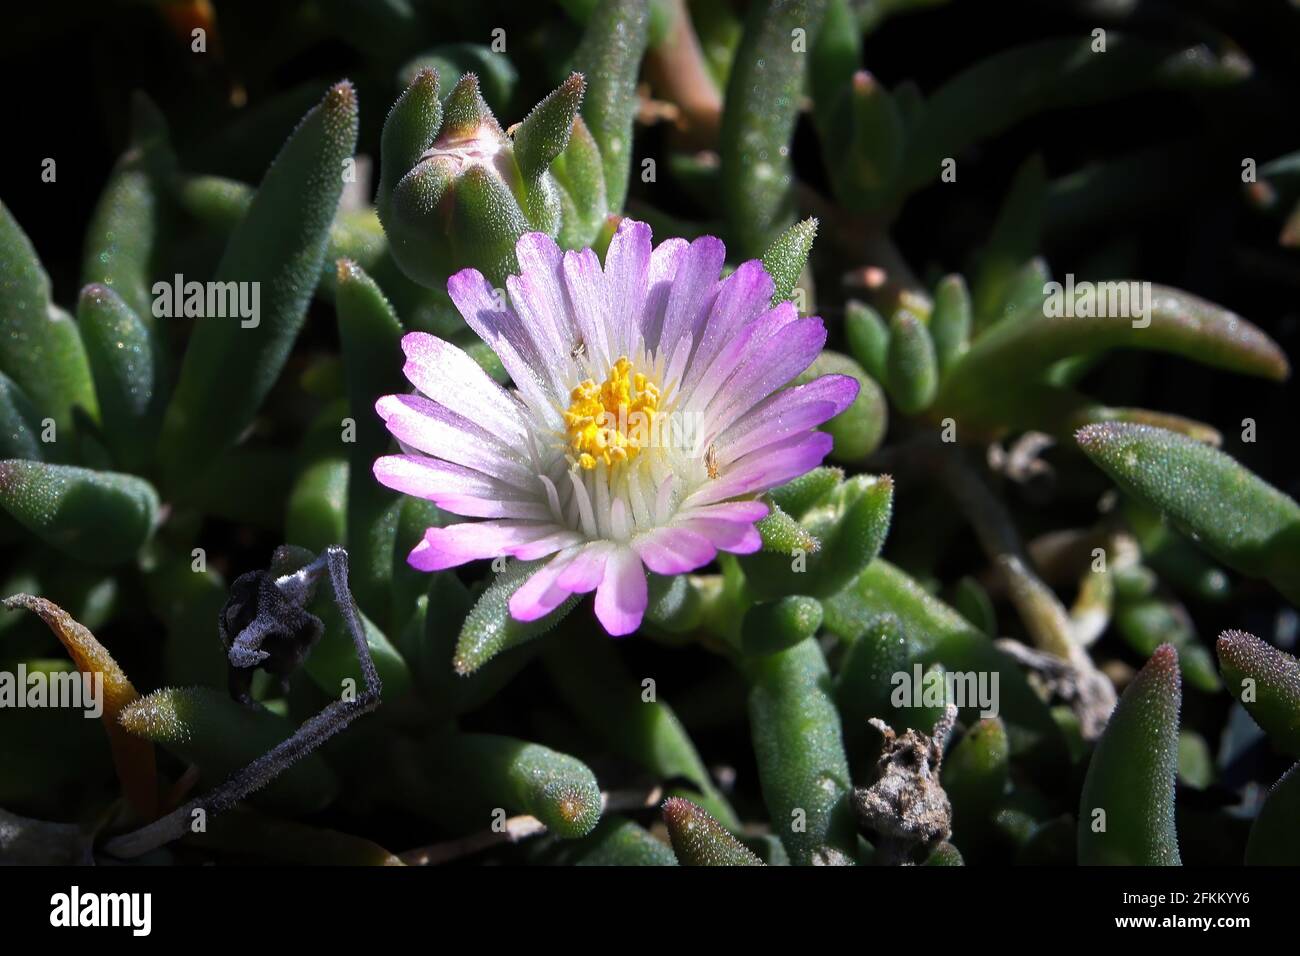 Closeup of the flower on the trailing ice plant Lampranthus Stock Photo